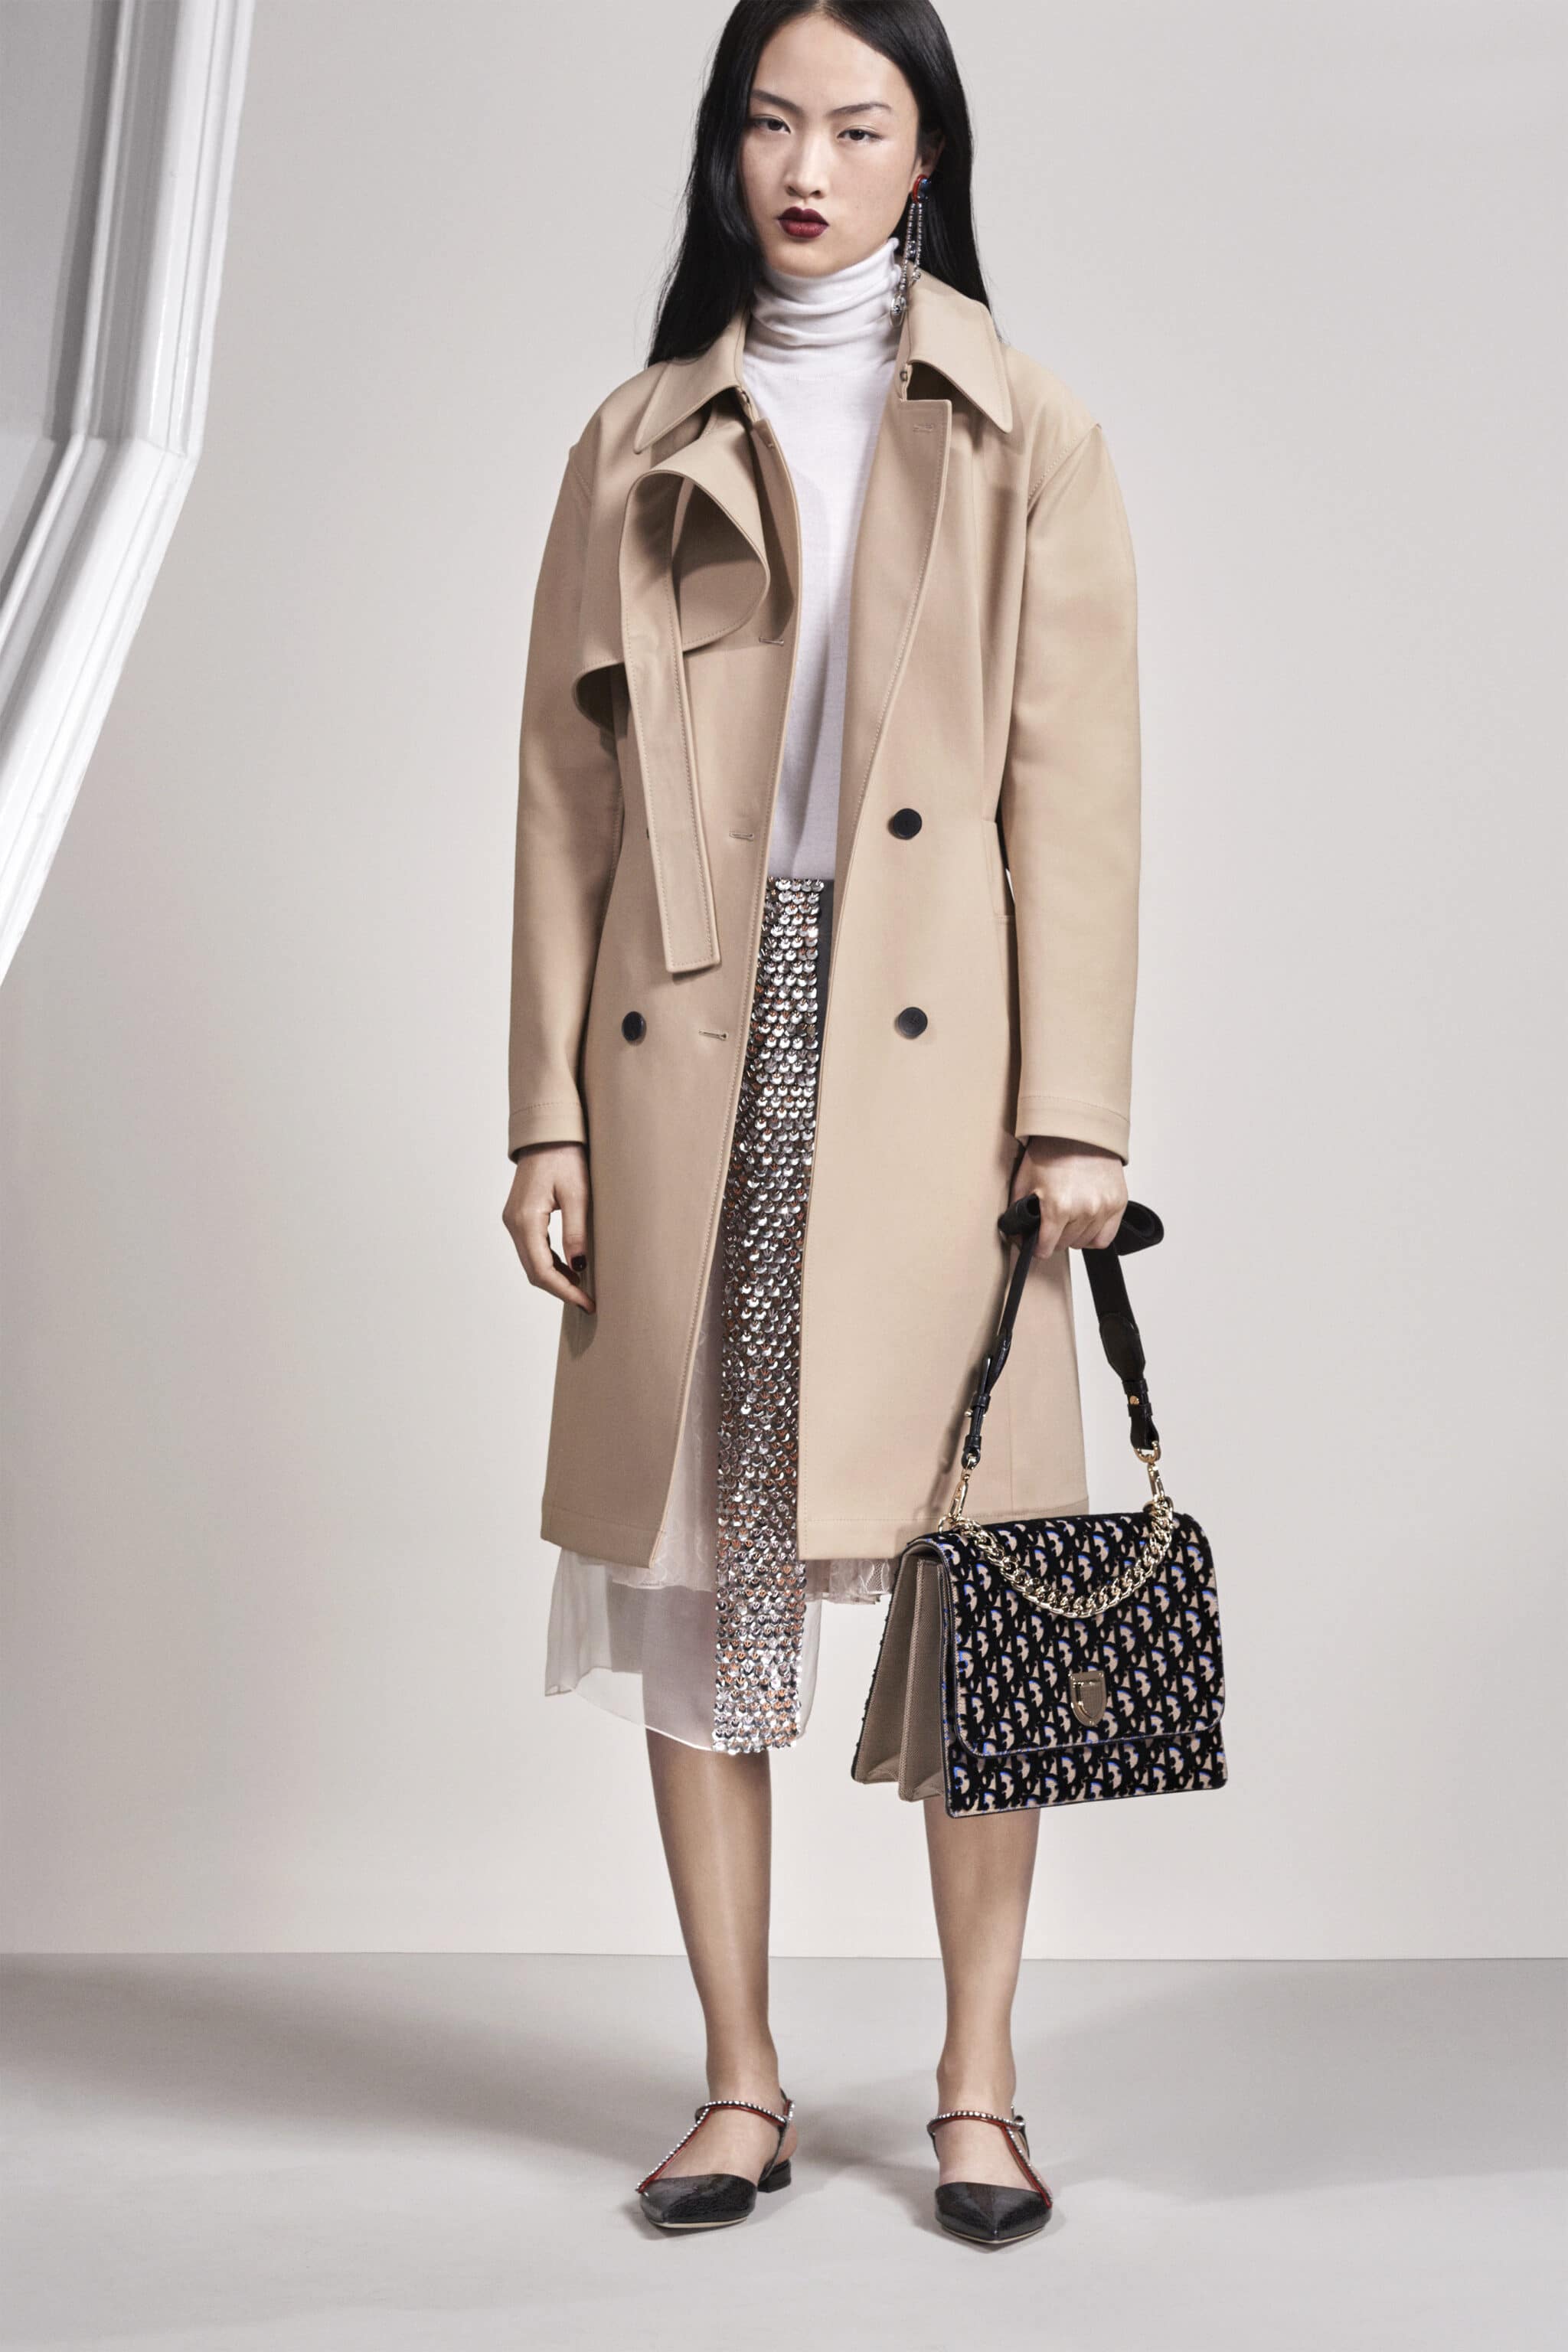 Dior Pre-Fall 2016 Bag Collection - Spotted Fashion